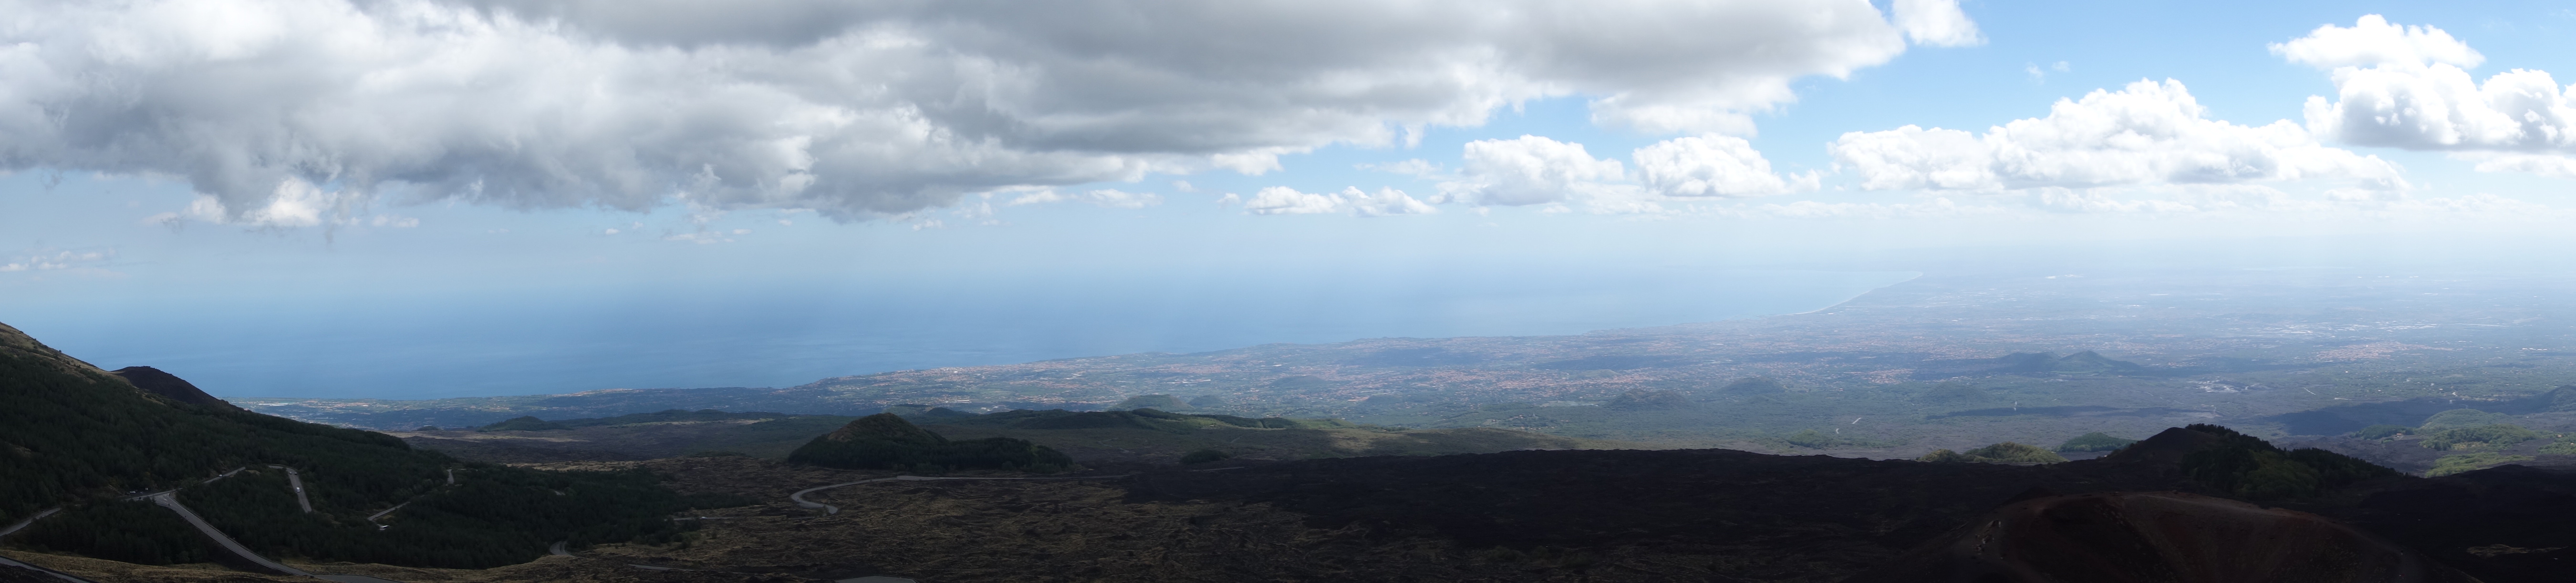 View from Mt. Etna